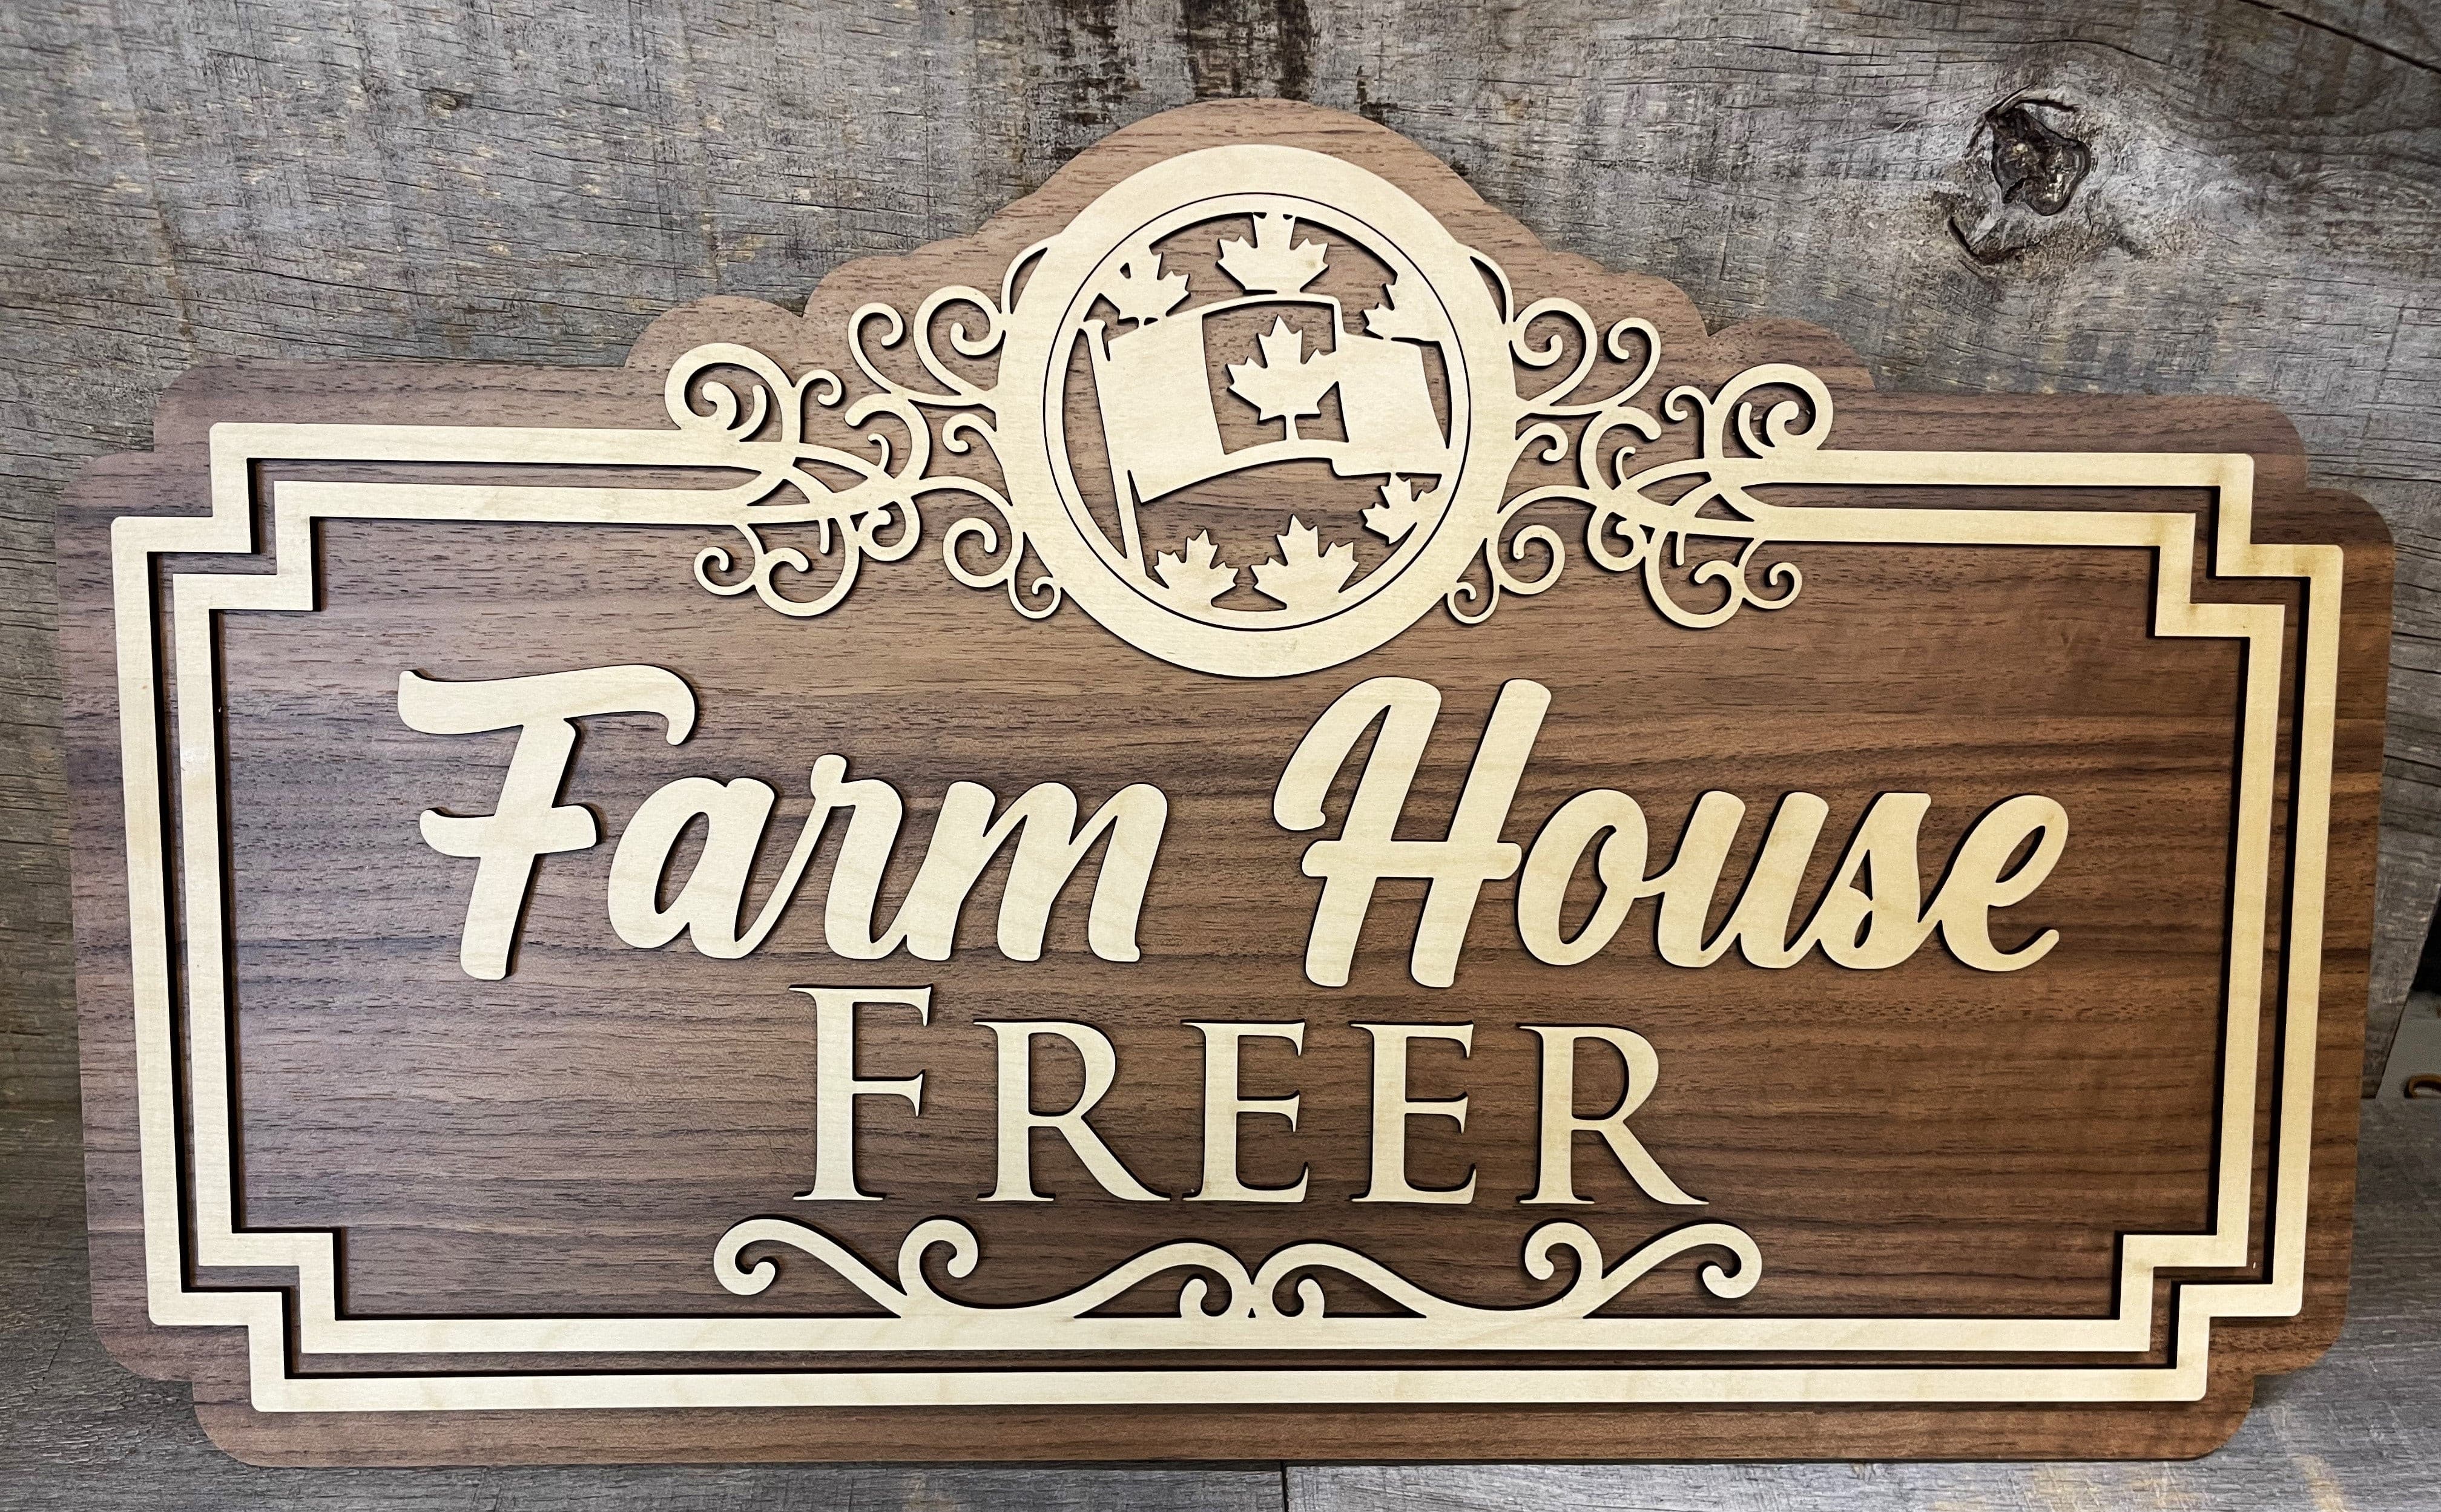 Personalized home décor sign with interchangeable icons.